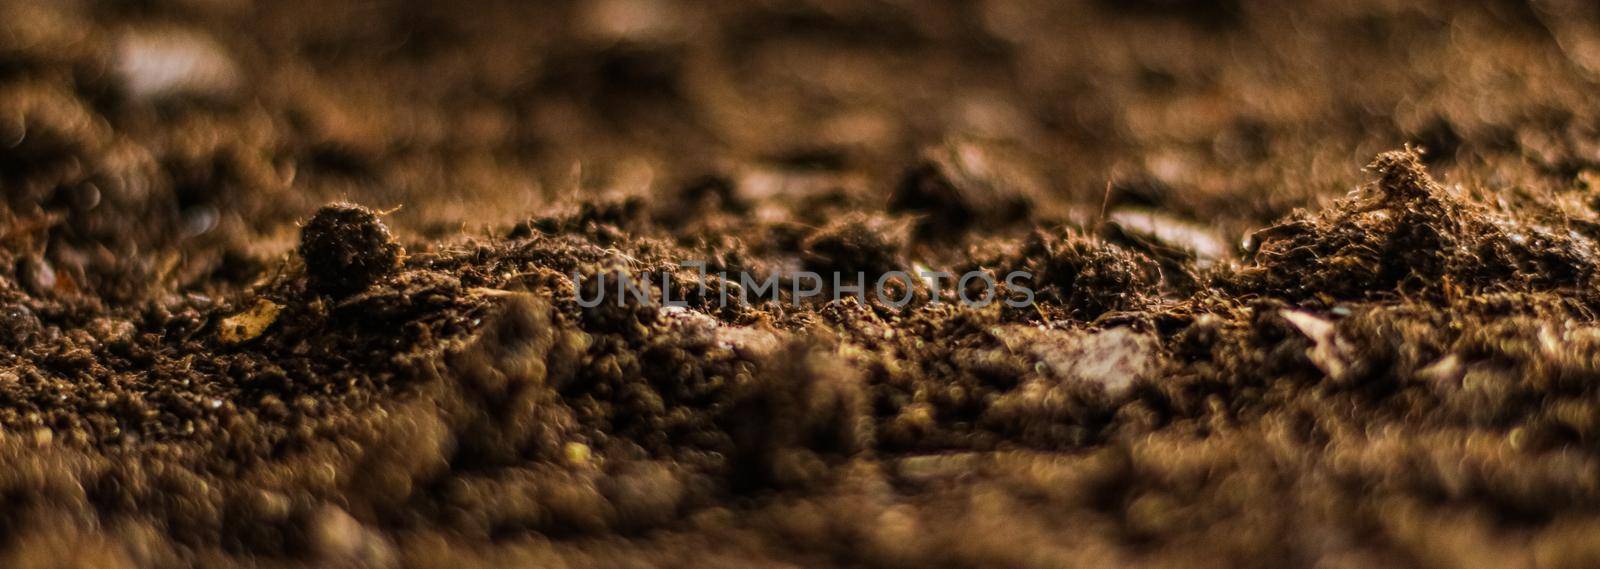 Earth ground texture as background, nature and environment by Anneleven